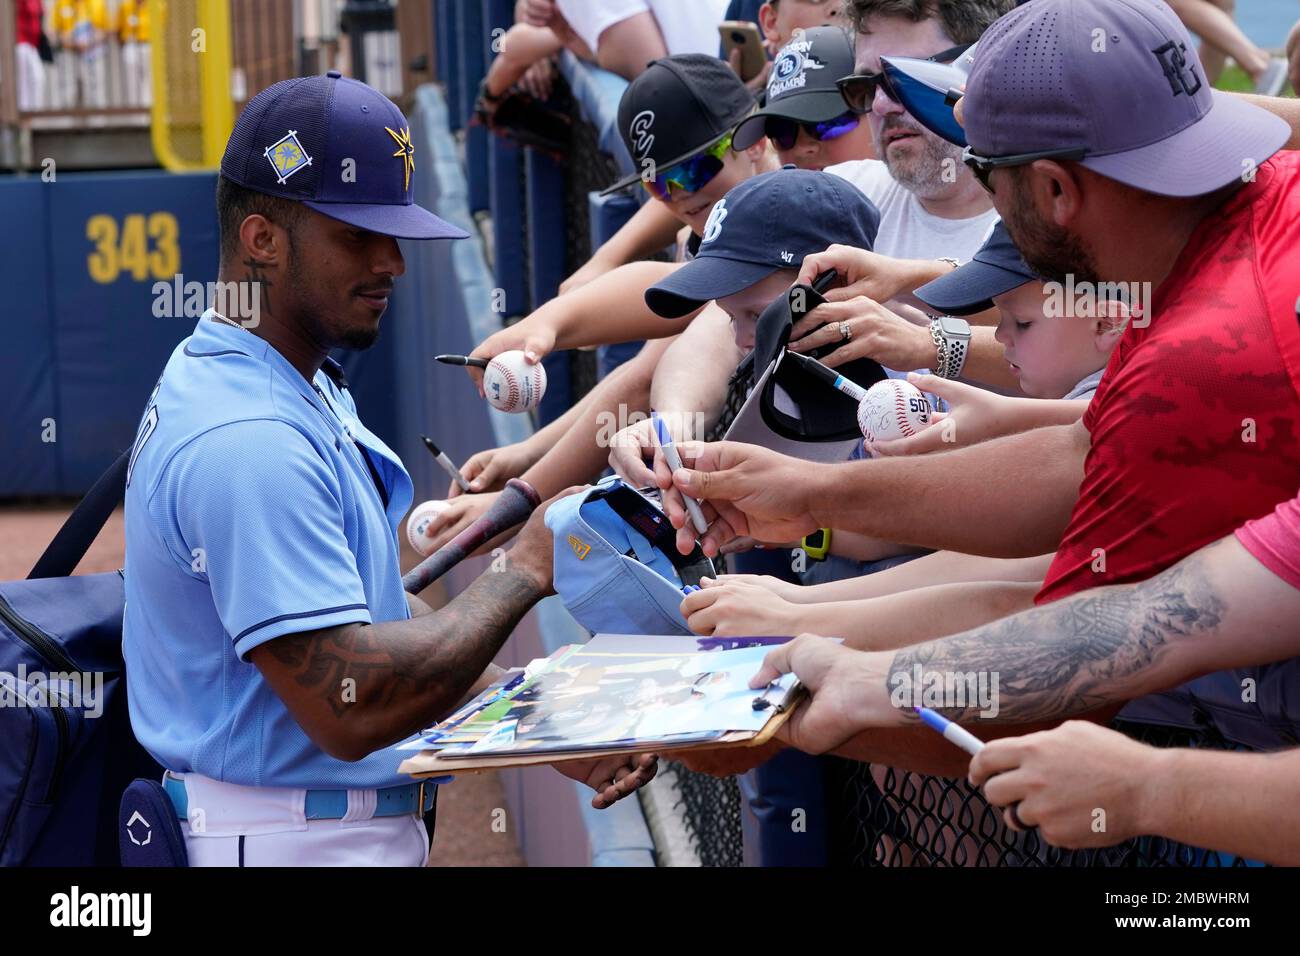 Tampa Bay Rays shortstop Wander Franco (5) signs autographs prior